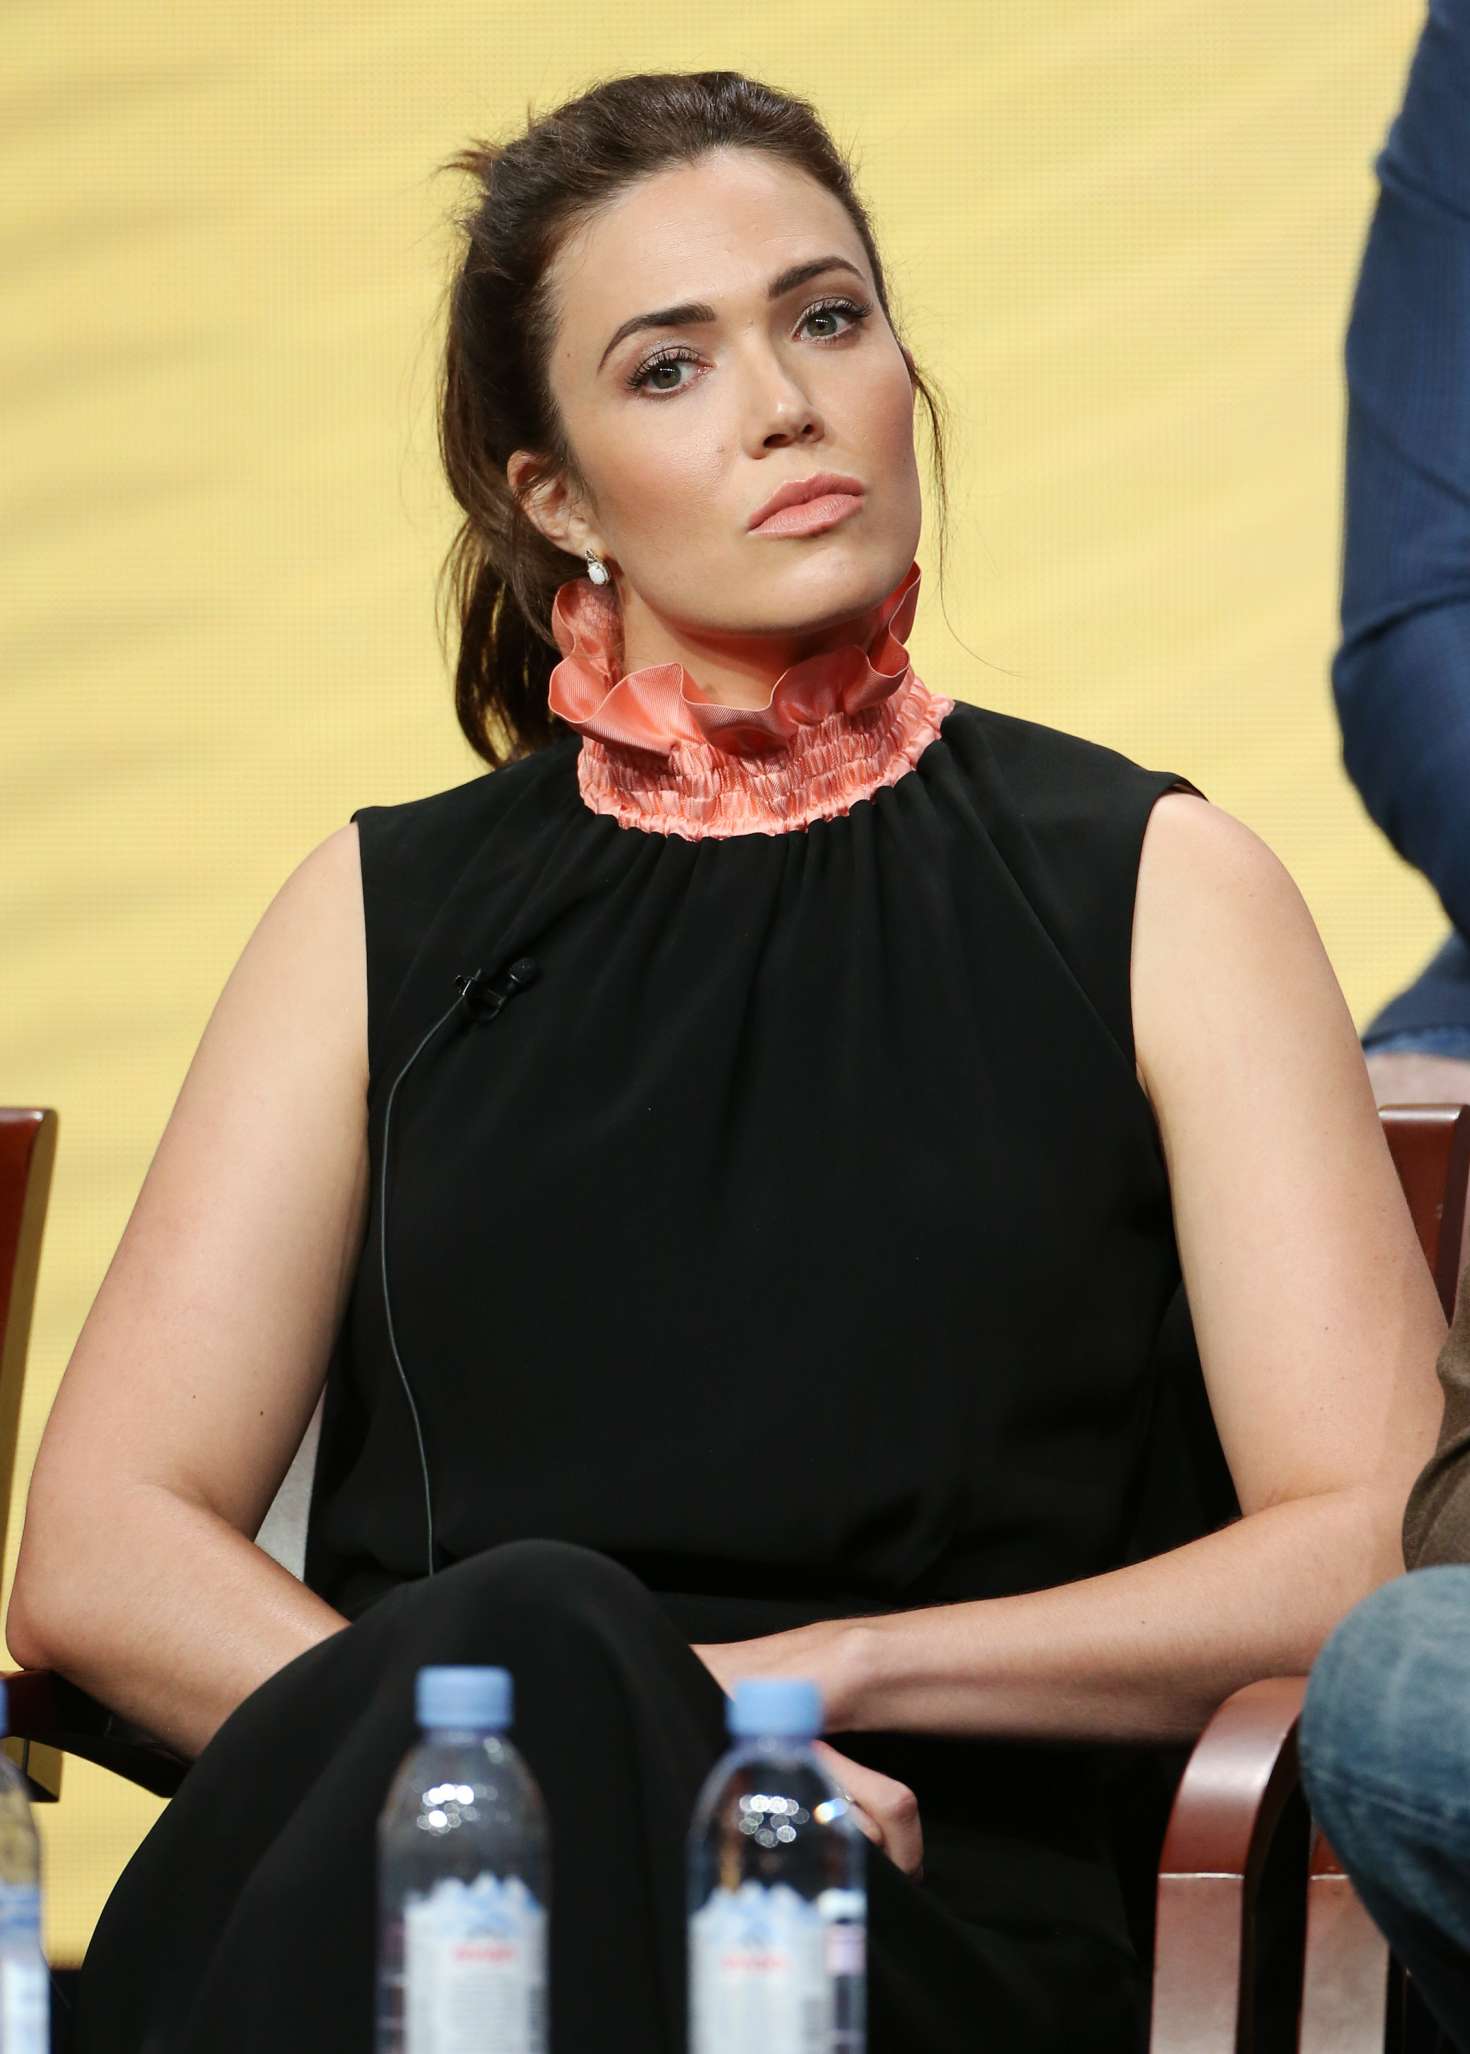 Mandy Moore - 'This Is Us' TV Show Panel at 2017 TCA Summer Press Tour in LA